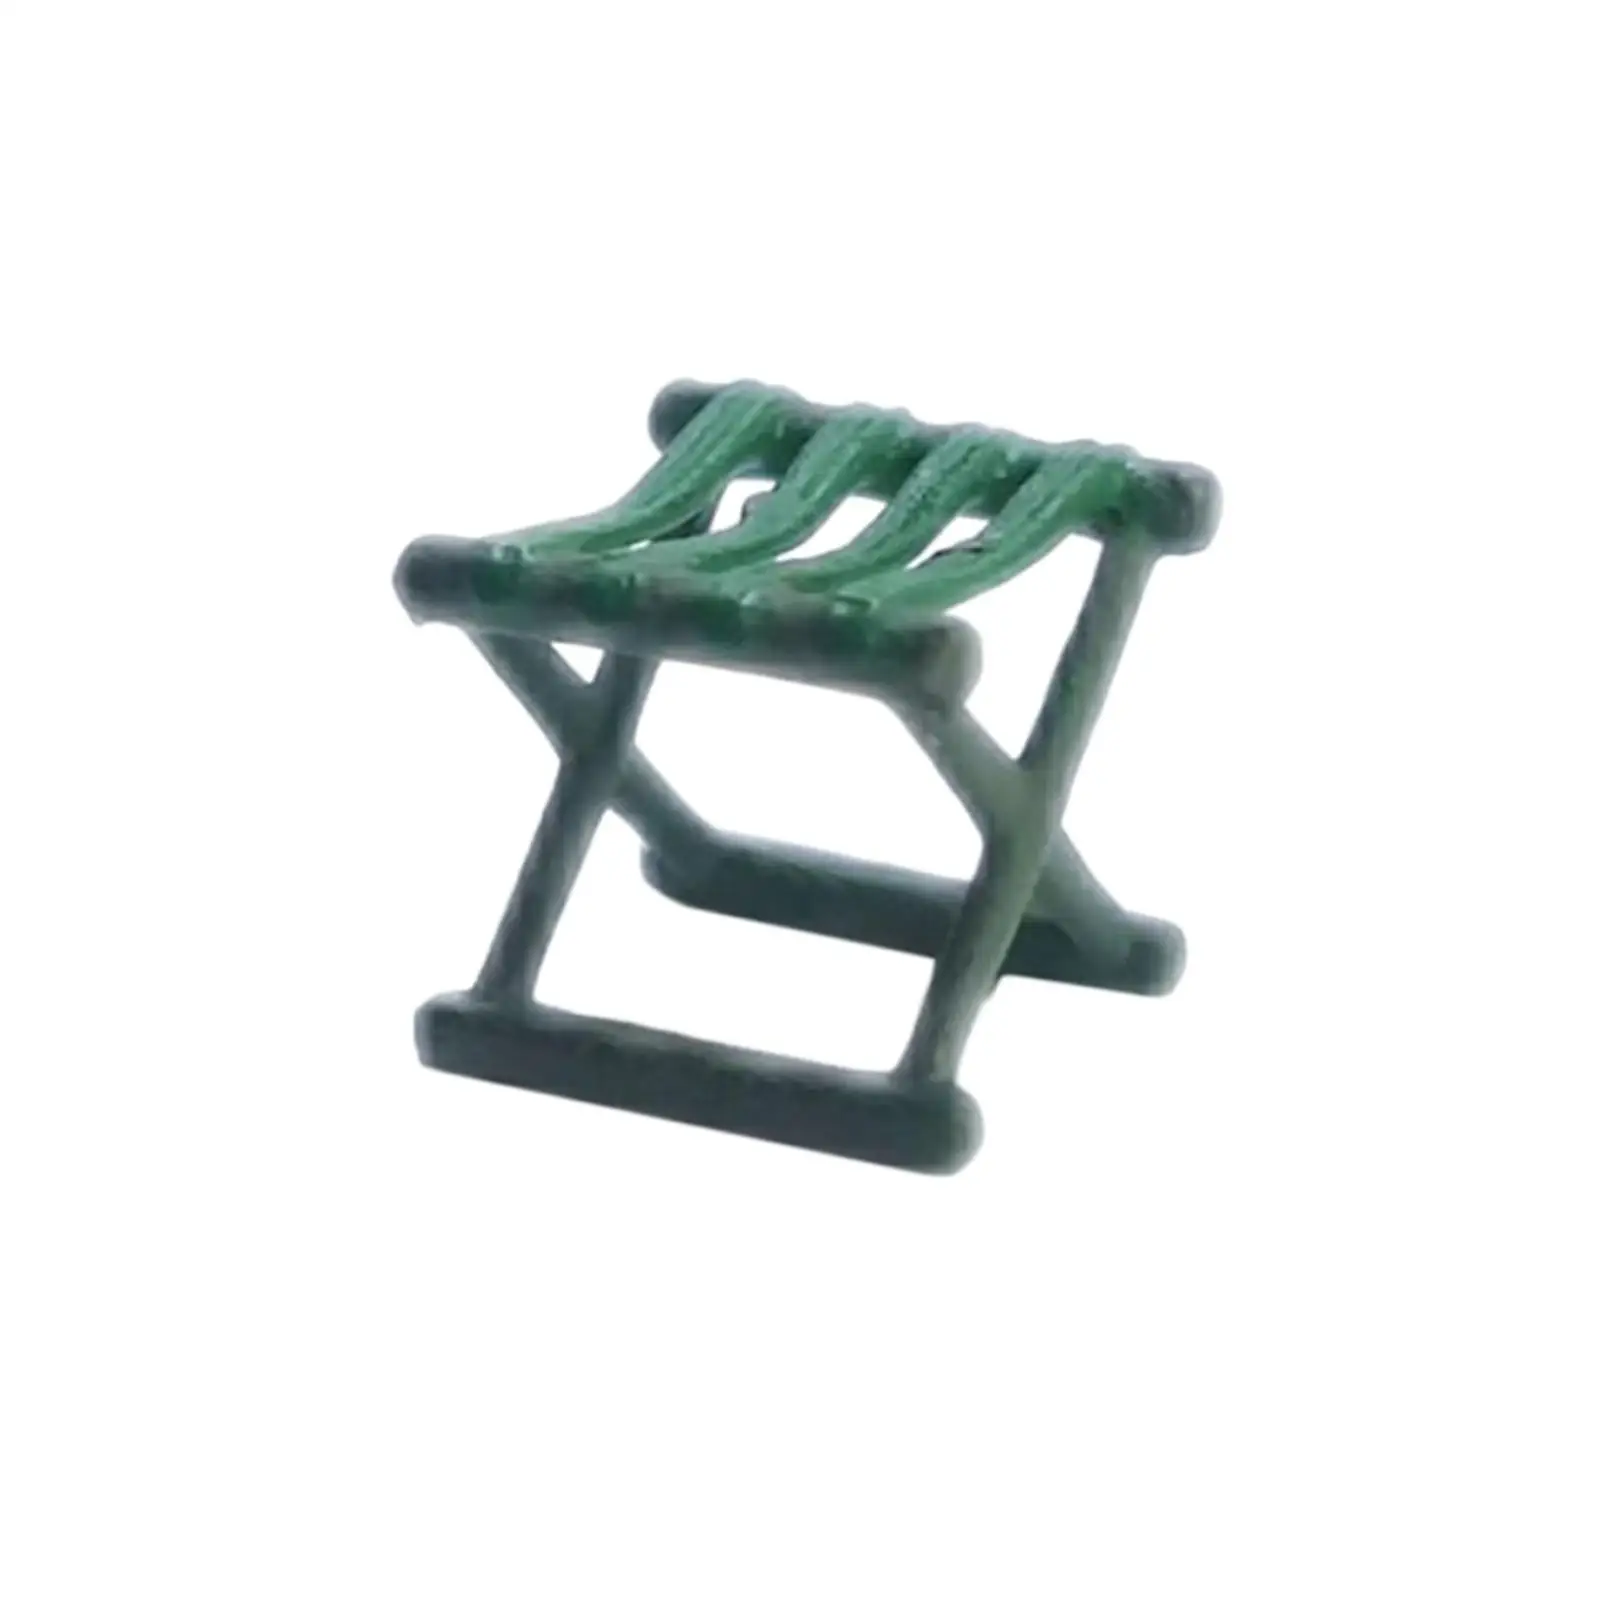 1/64 Folding Stool DIY Projects Desktop Ornament S Gauge Collections Micro Landscape Layout Diorama Scenery Camp Stool Miniature